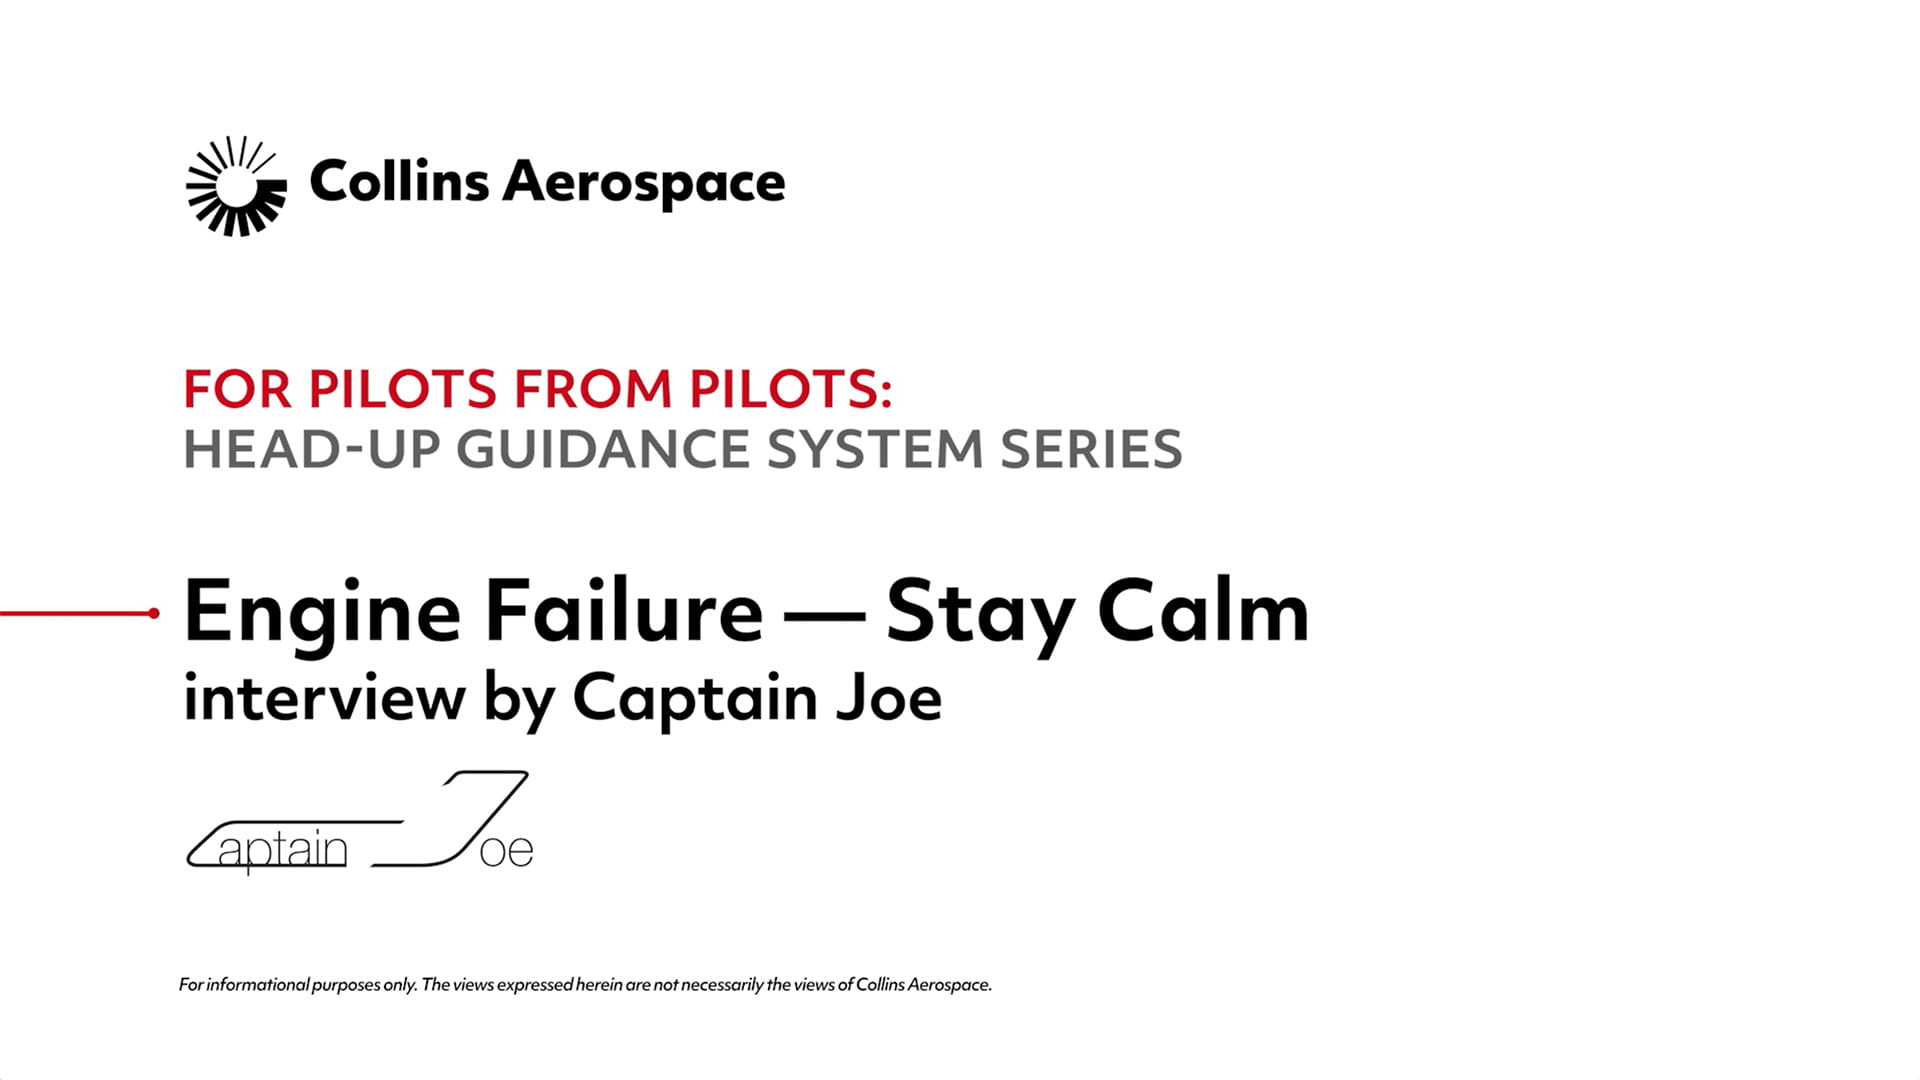 For pilots from pilots: Engine Failure